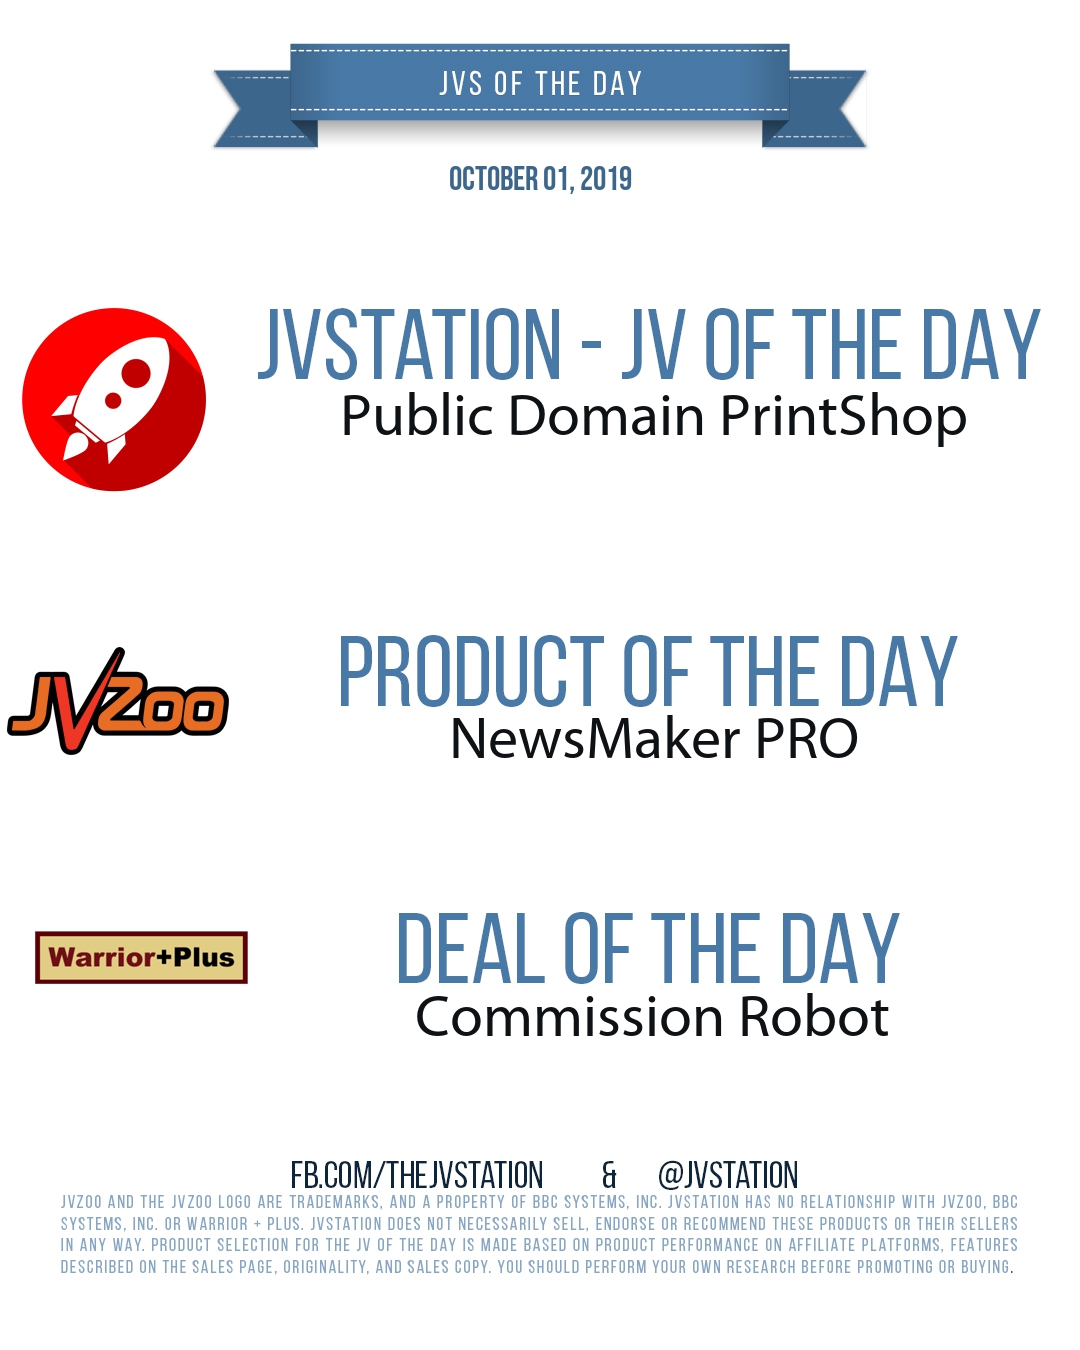 JVs of the day - October 01, 2019